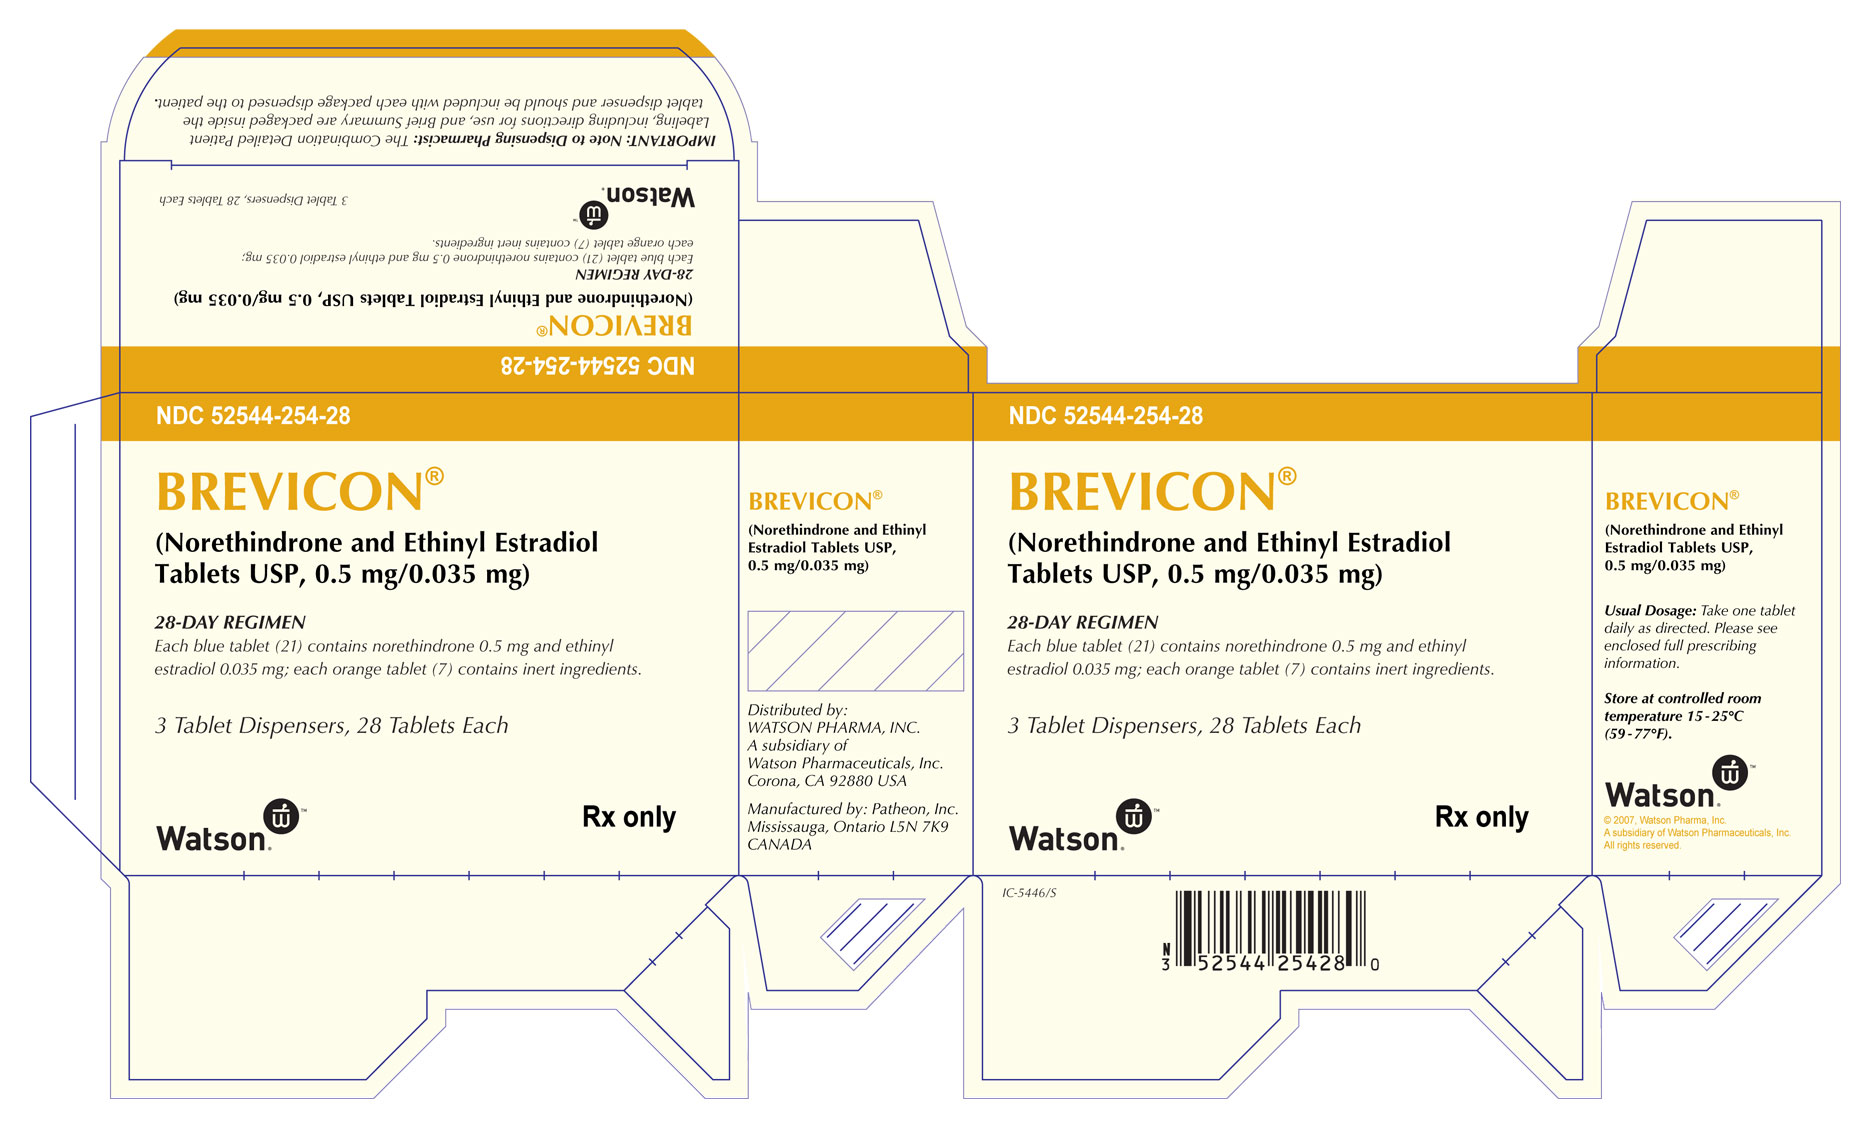 BREVICON® (Norethindrone and Ethinyl Estradiol Tablets USP, 0.5 mg/0.035 mg) NDC 52544-254-28 Carton x 3 - 28 tablet dispensers